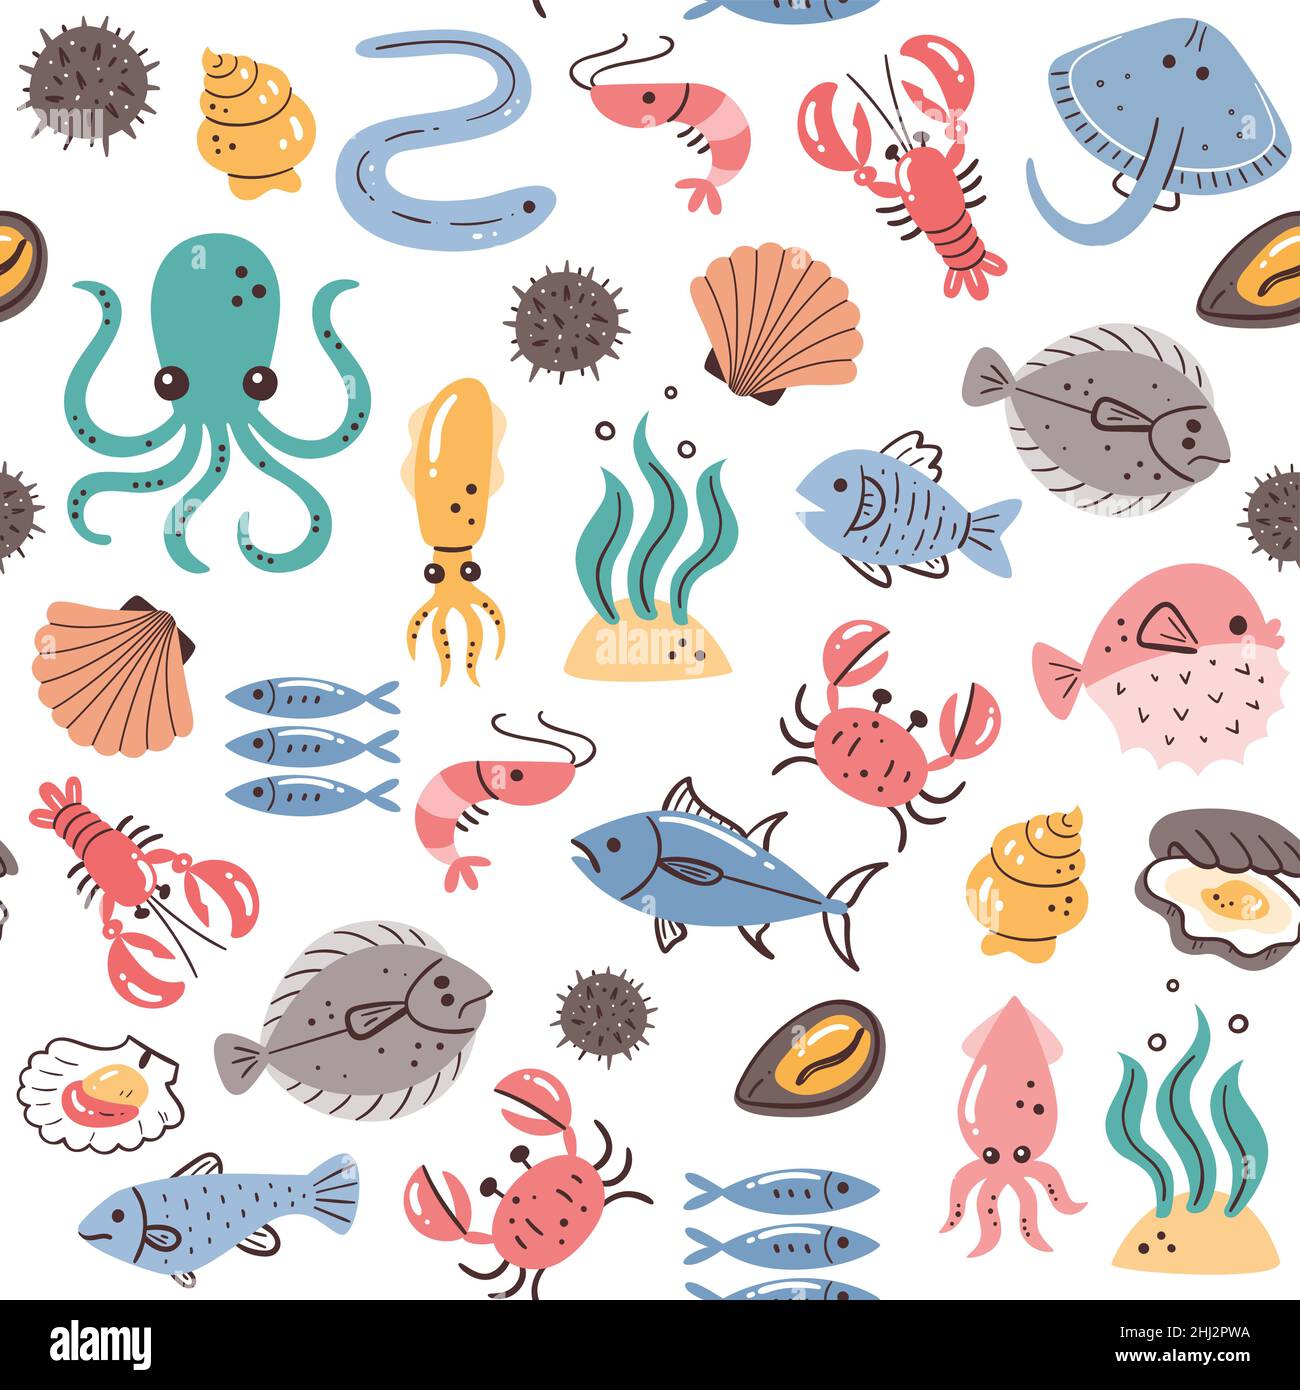 Seafood seamless pattern. Fish, seaweed and shellfish. Food ingredients for cooking illustration. Isolated colorful hand-drawn ingredients on white ba Stock Vector